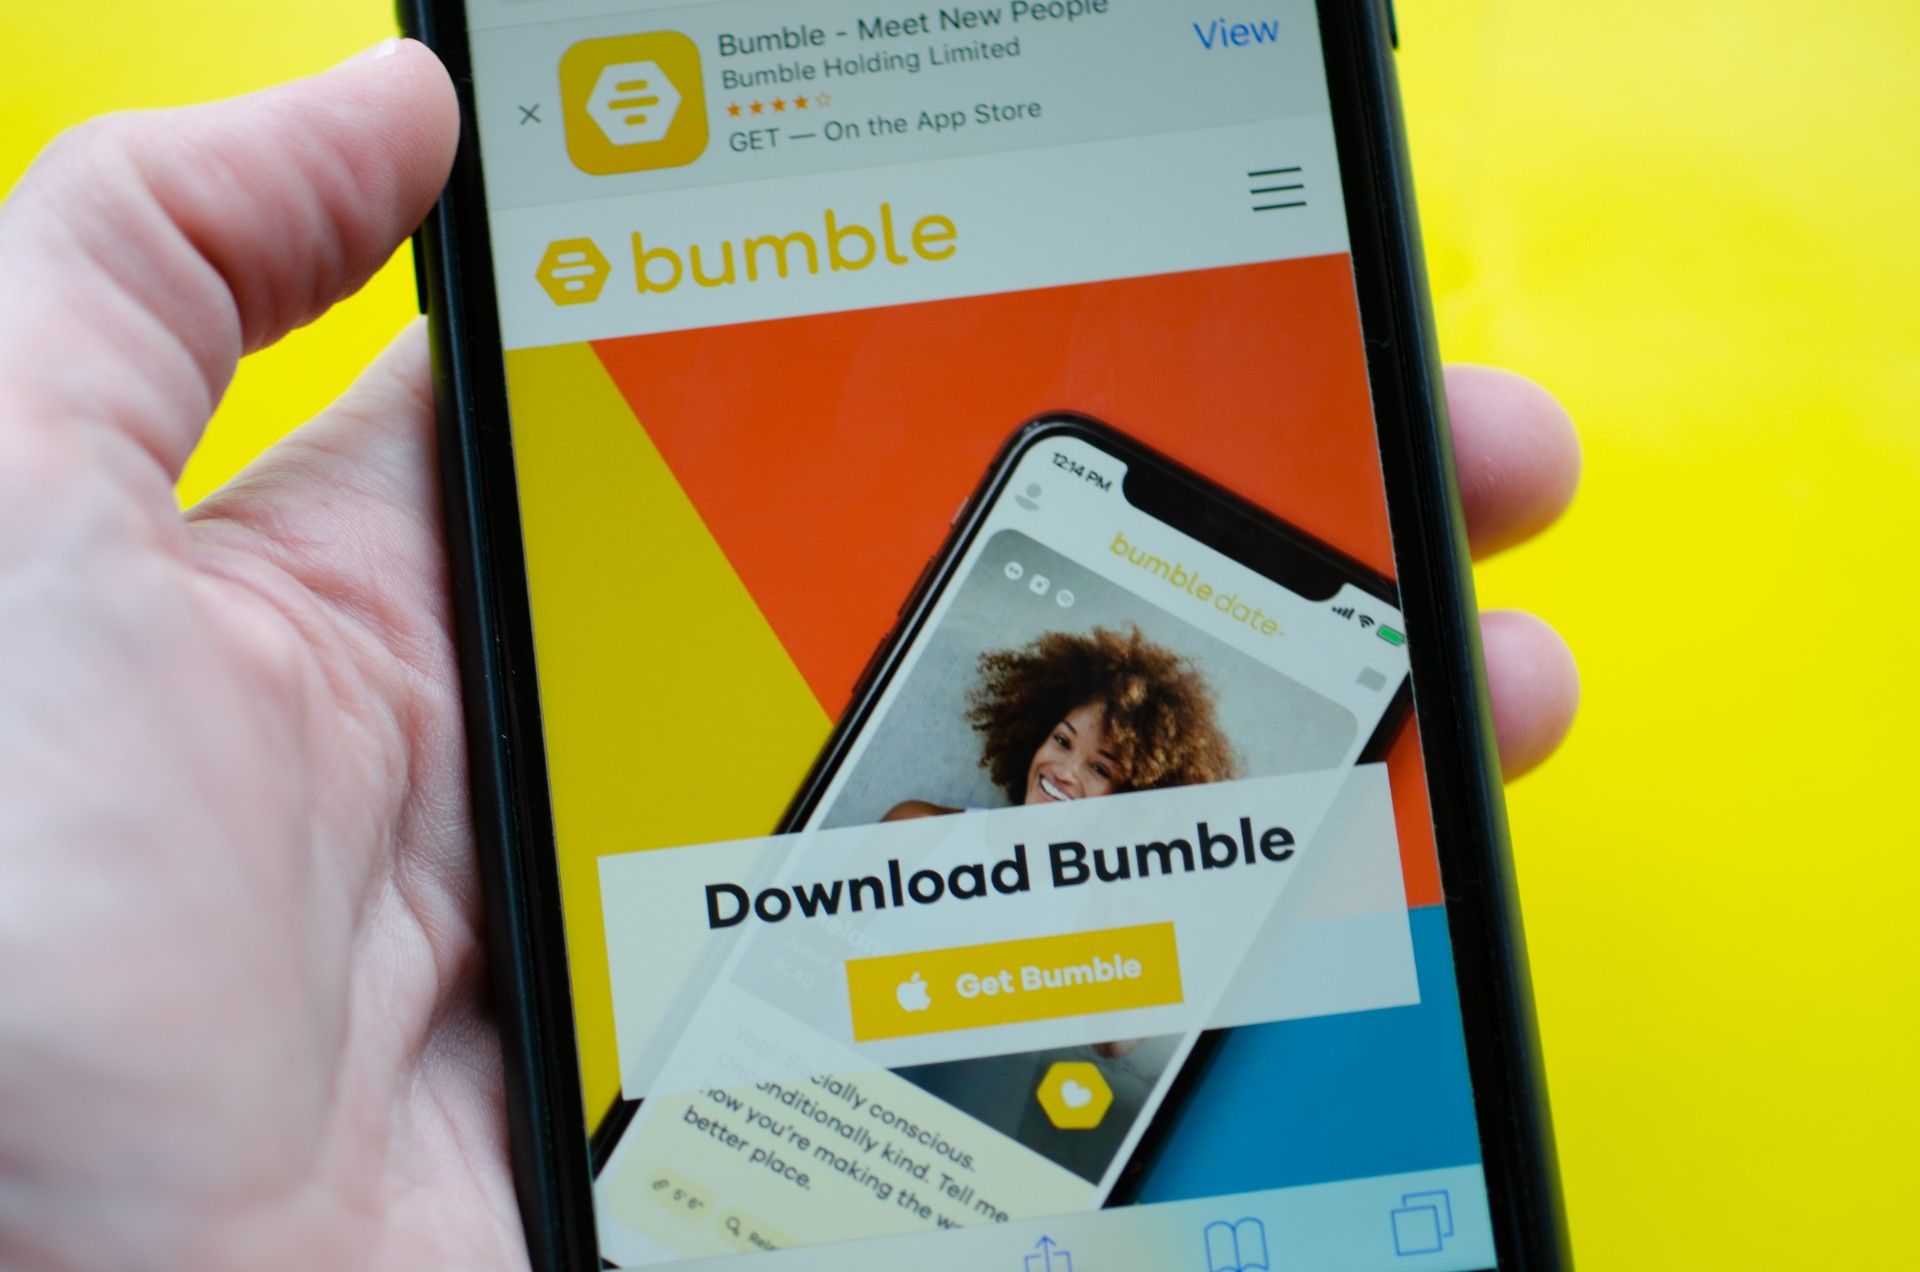 Person holds phone showing Bumble app download screen